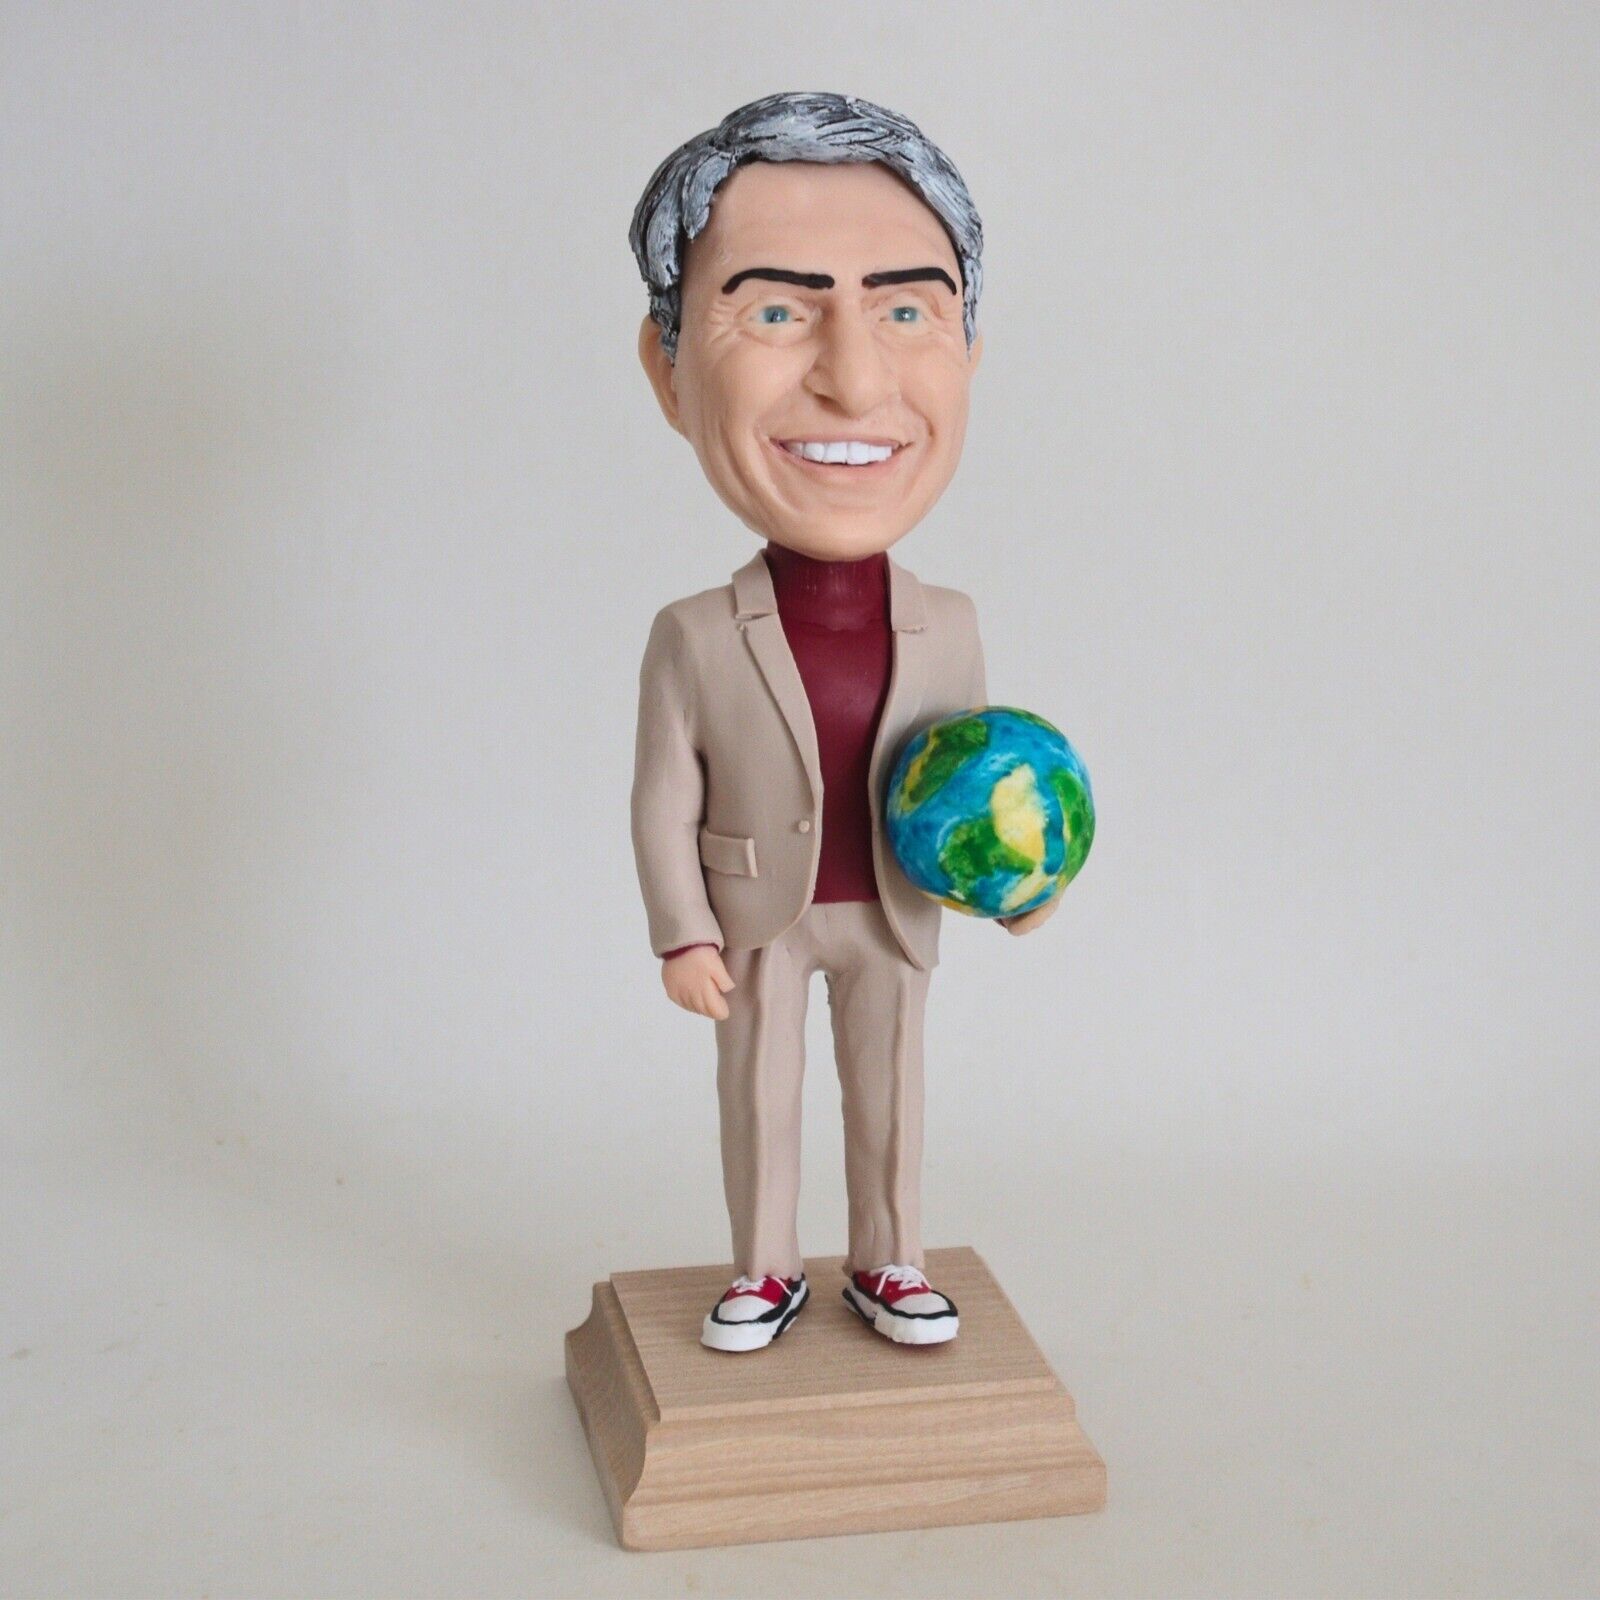 Carl Sagan Handmade Figurine - Tribute To The Iconic Astronomer And Scientist